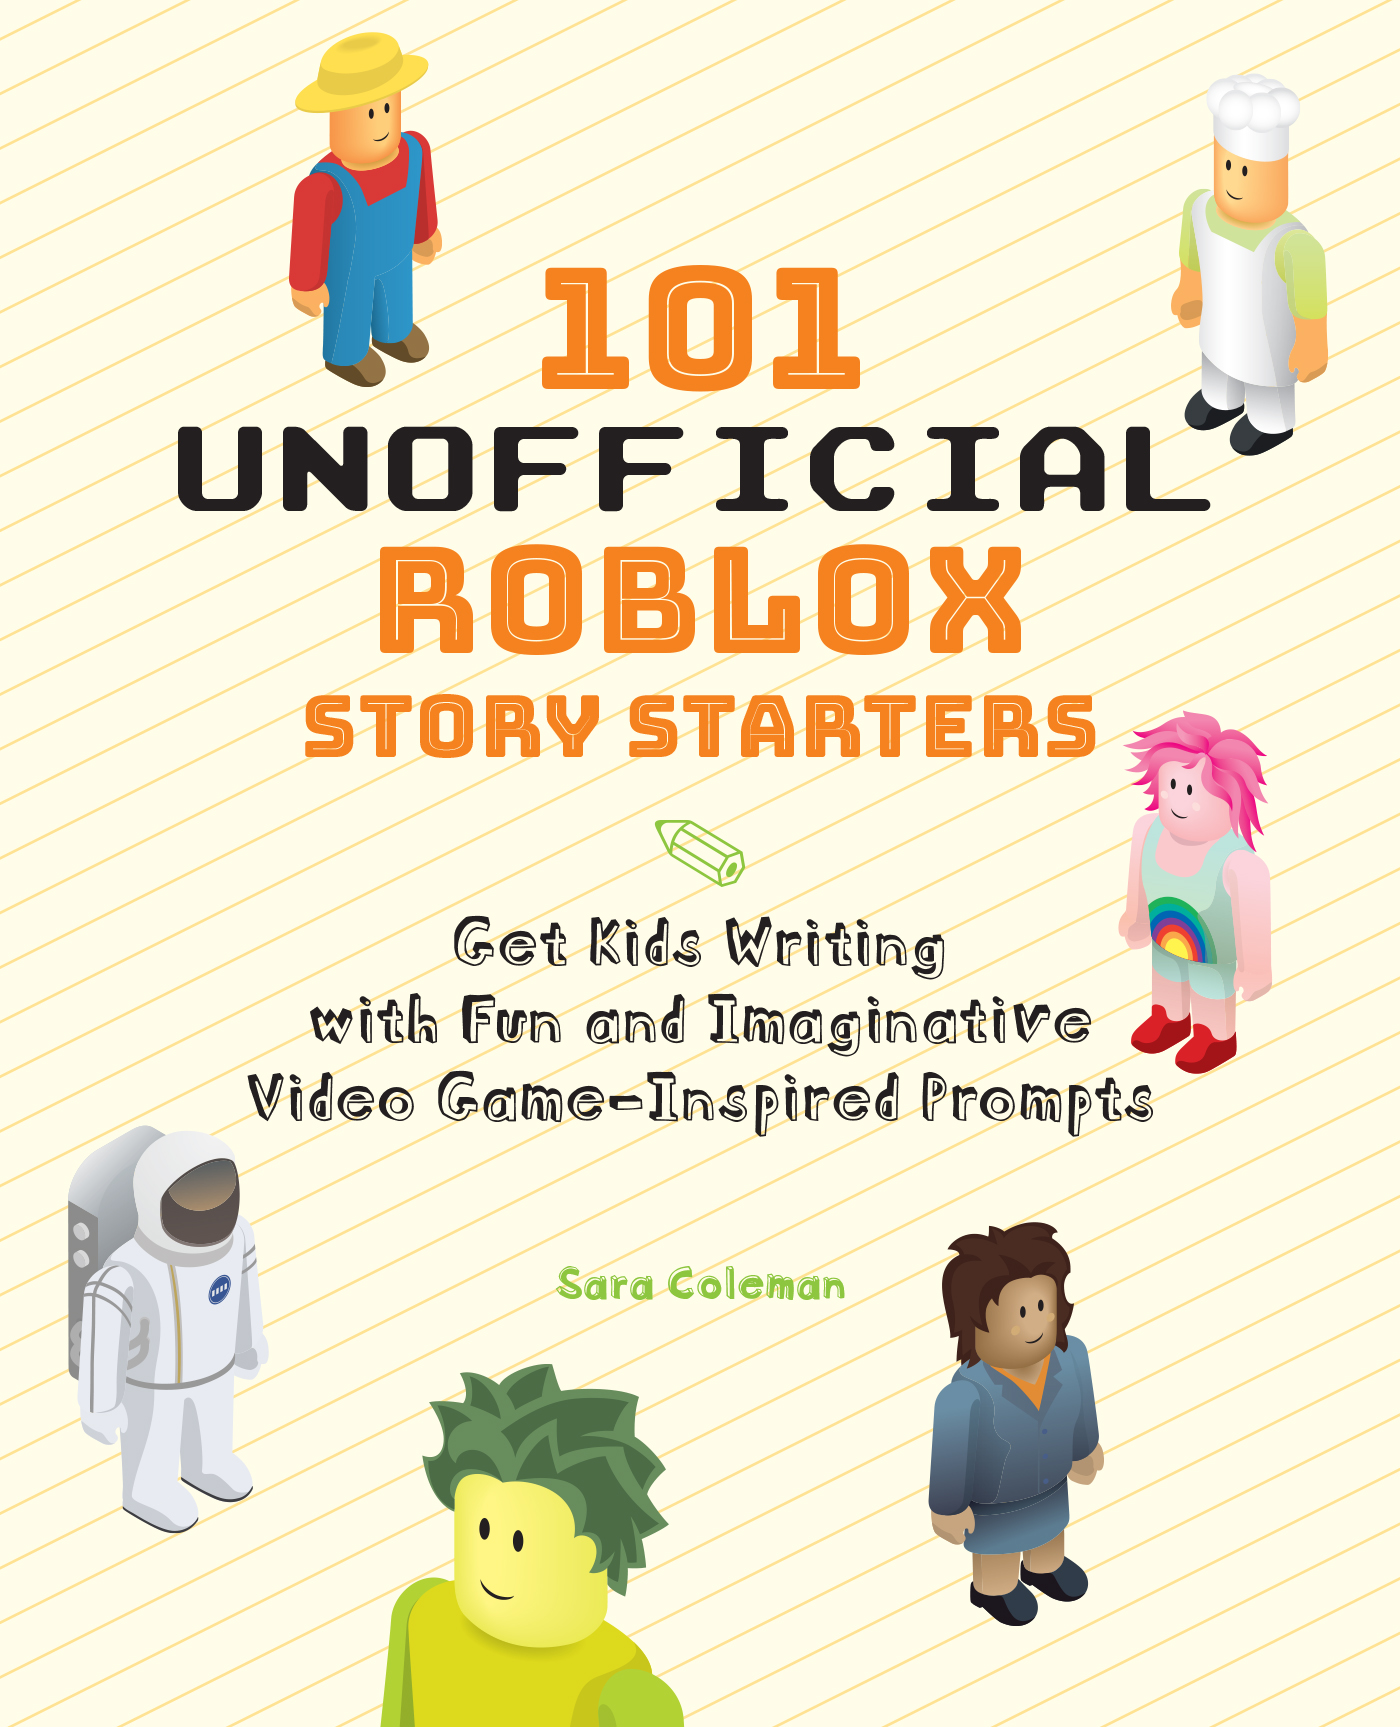 101 Unofficial Roblox Story Starters Ulysses Press - how to make a story game on roblox easy